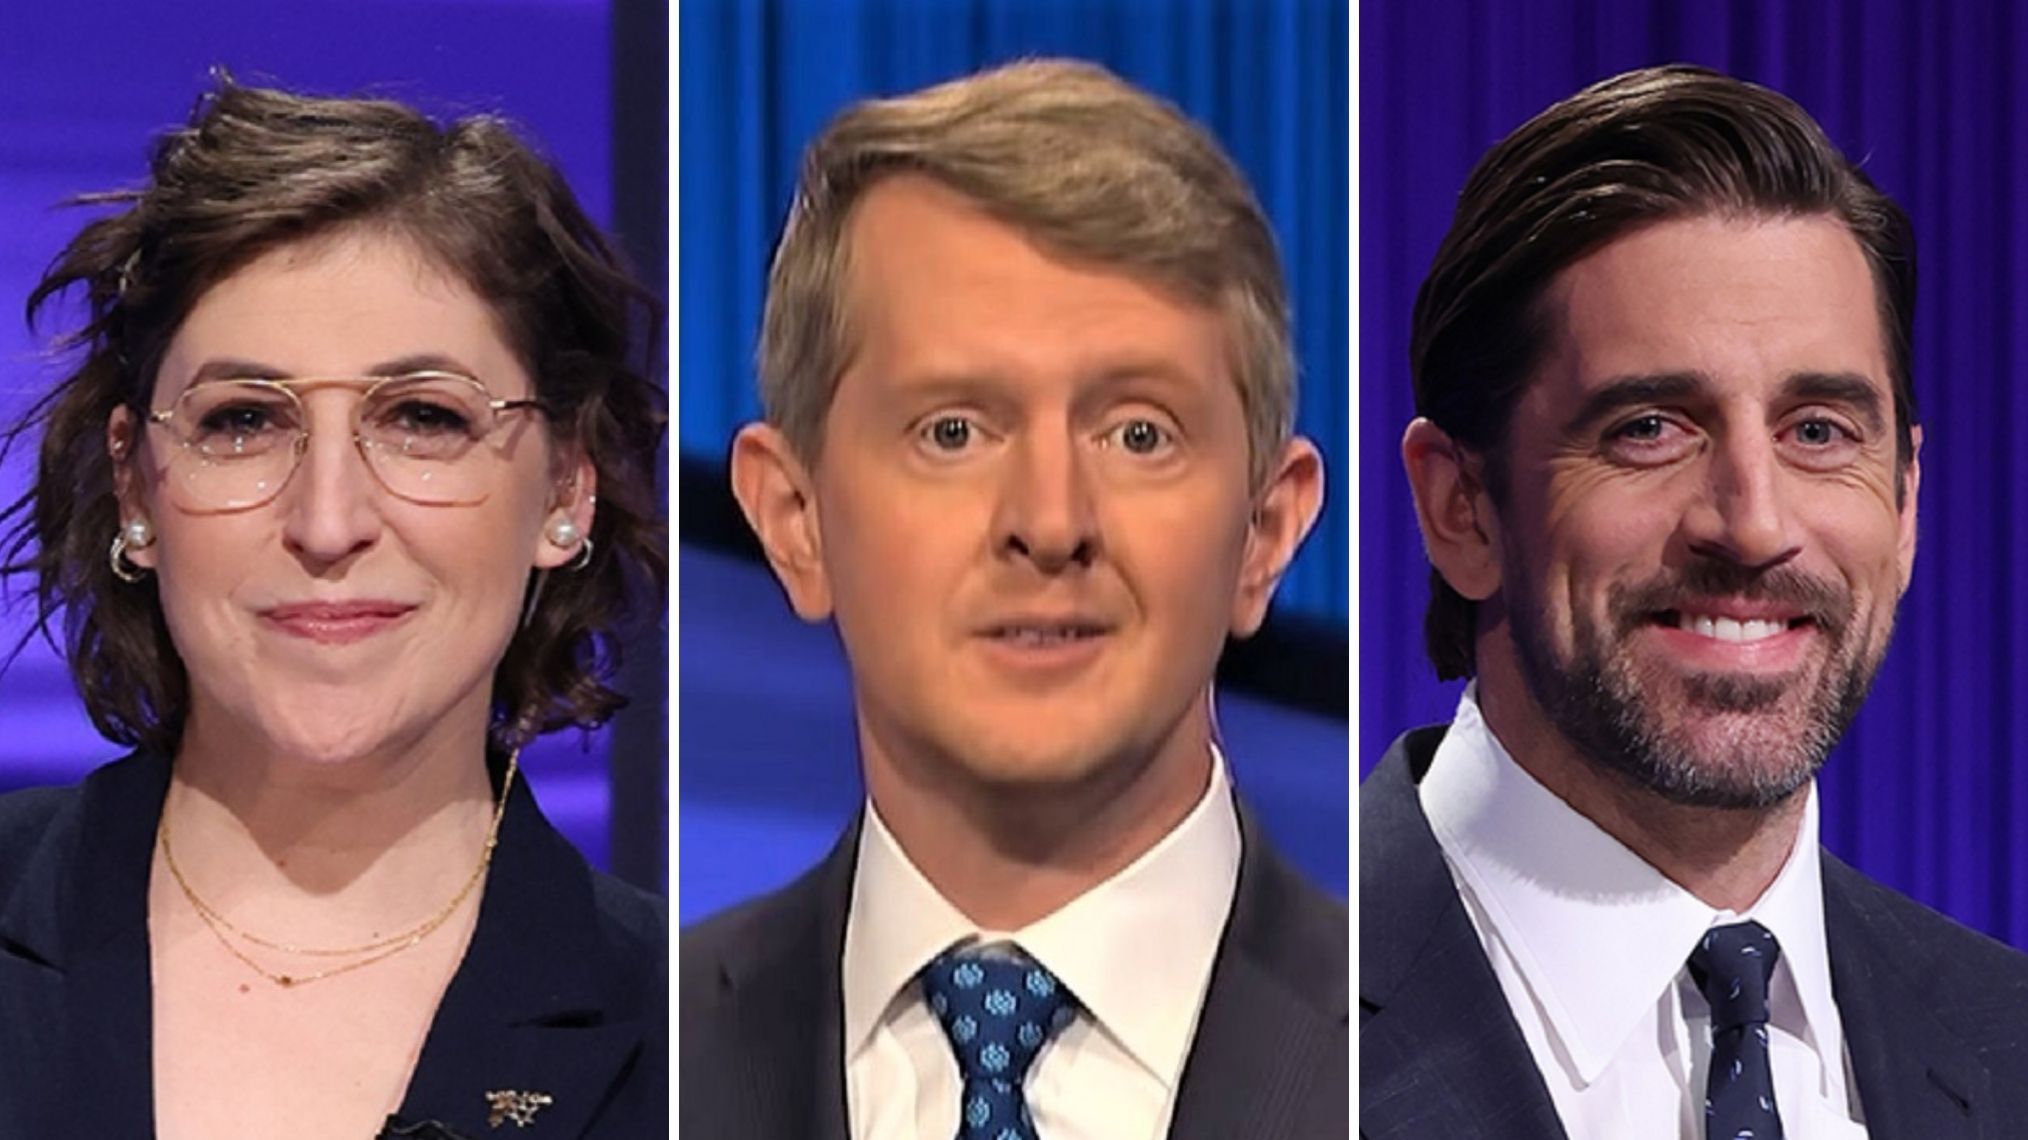 Results Readers Pick Their Favorite Jeopardy Guest Host So Far